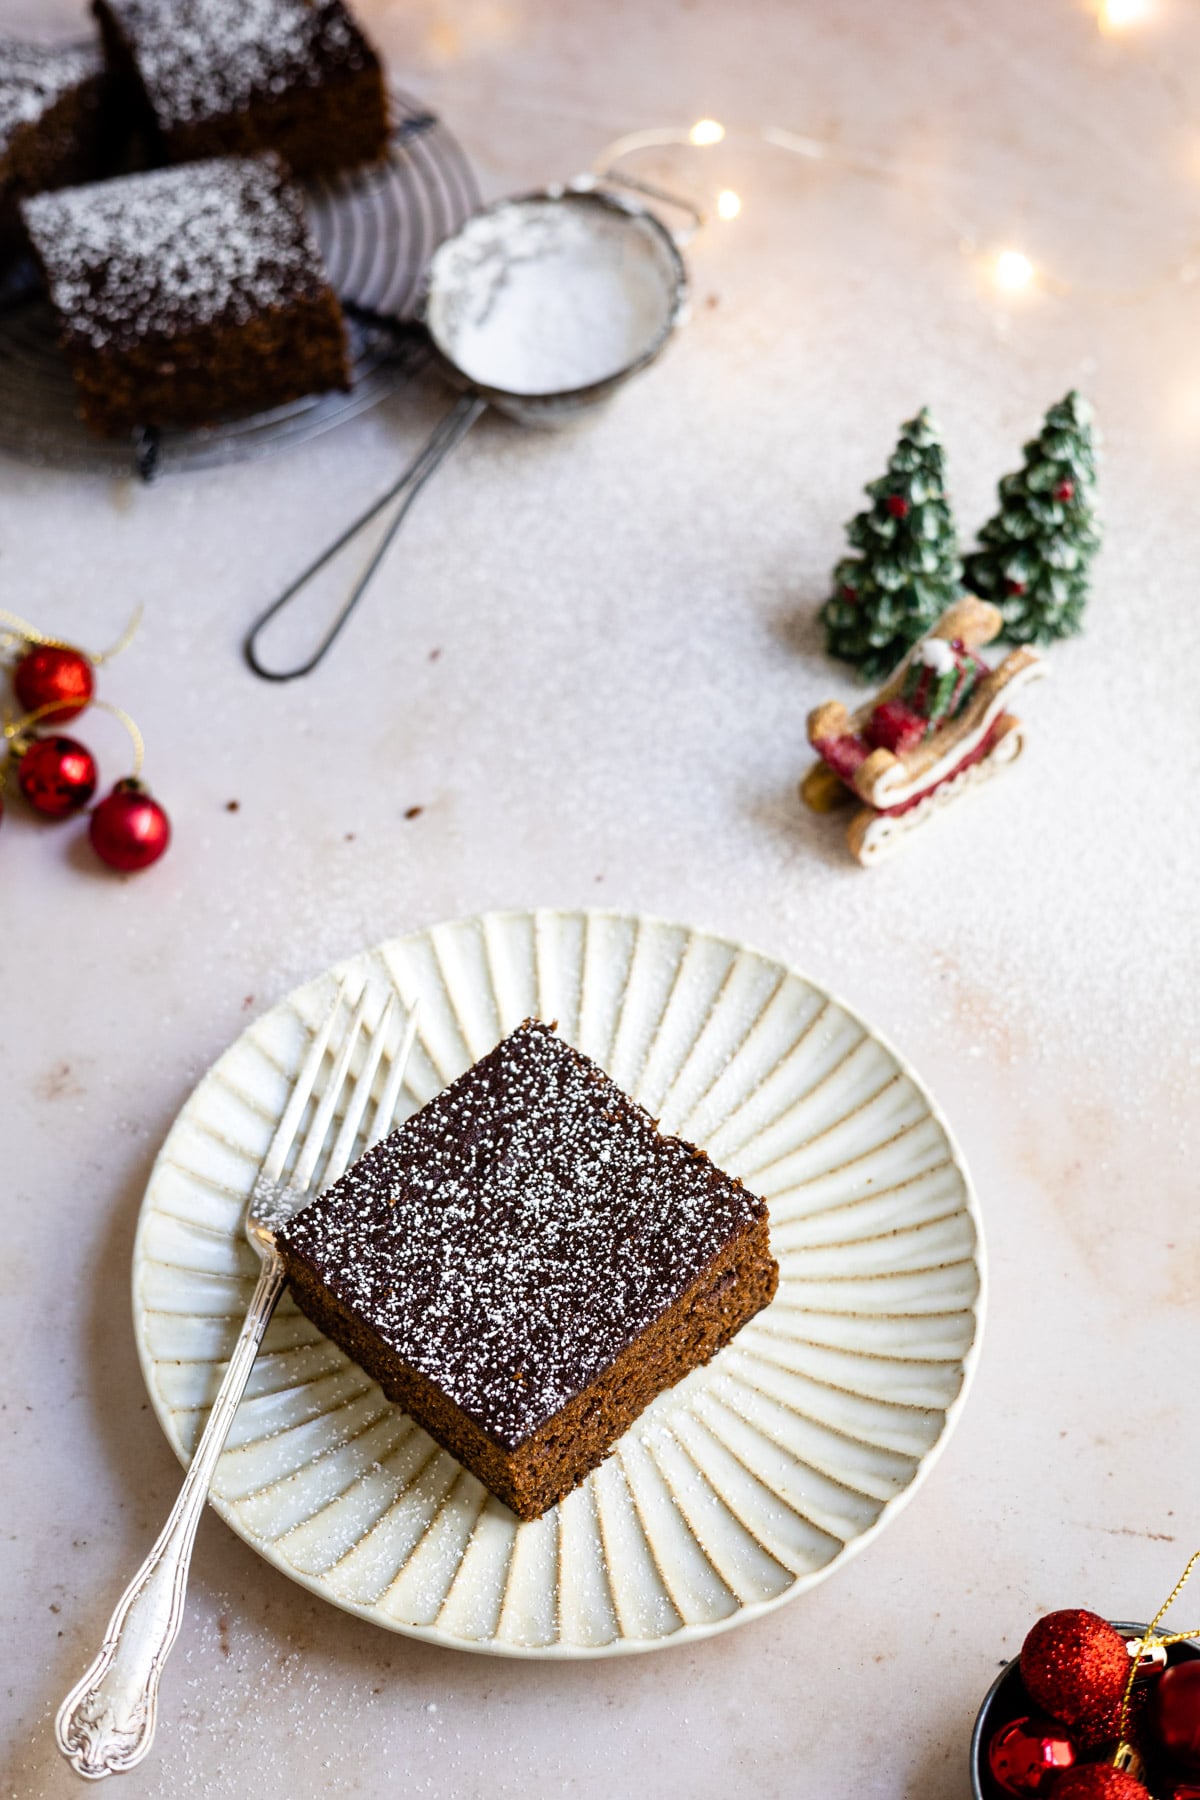 Piece of gingerbread cake on a white plate next to Christmas tree decorations.